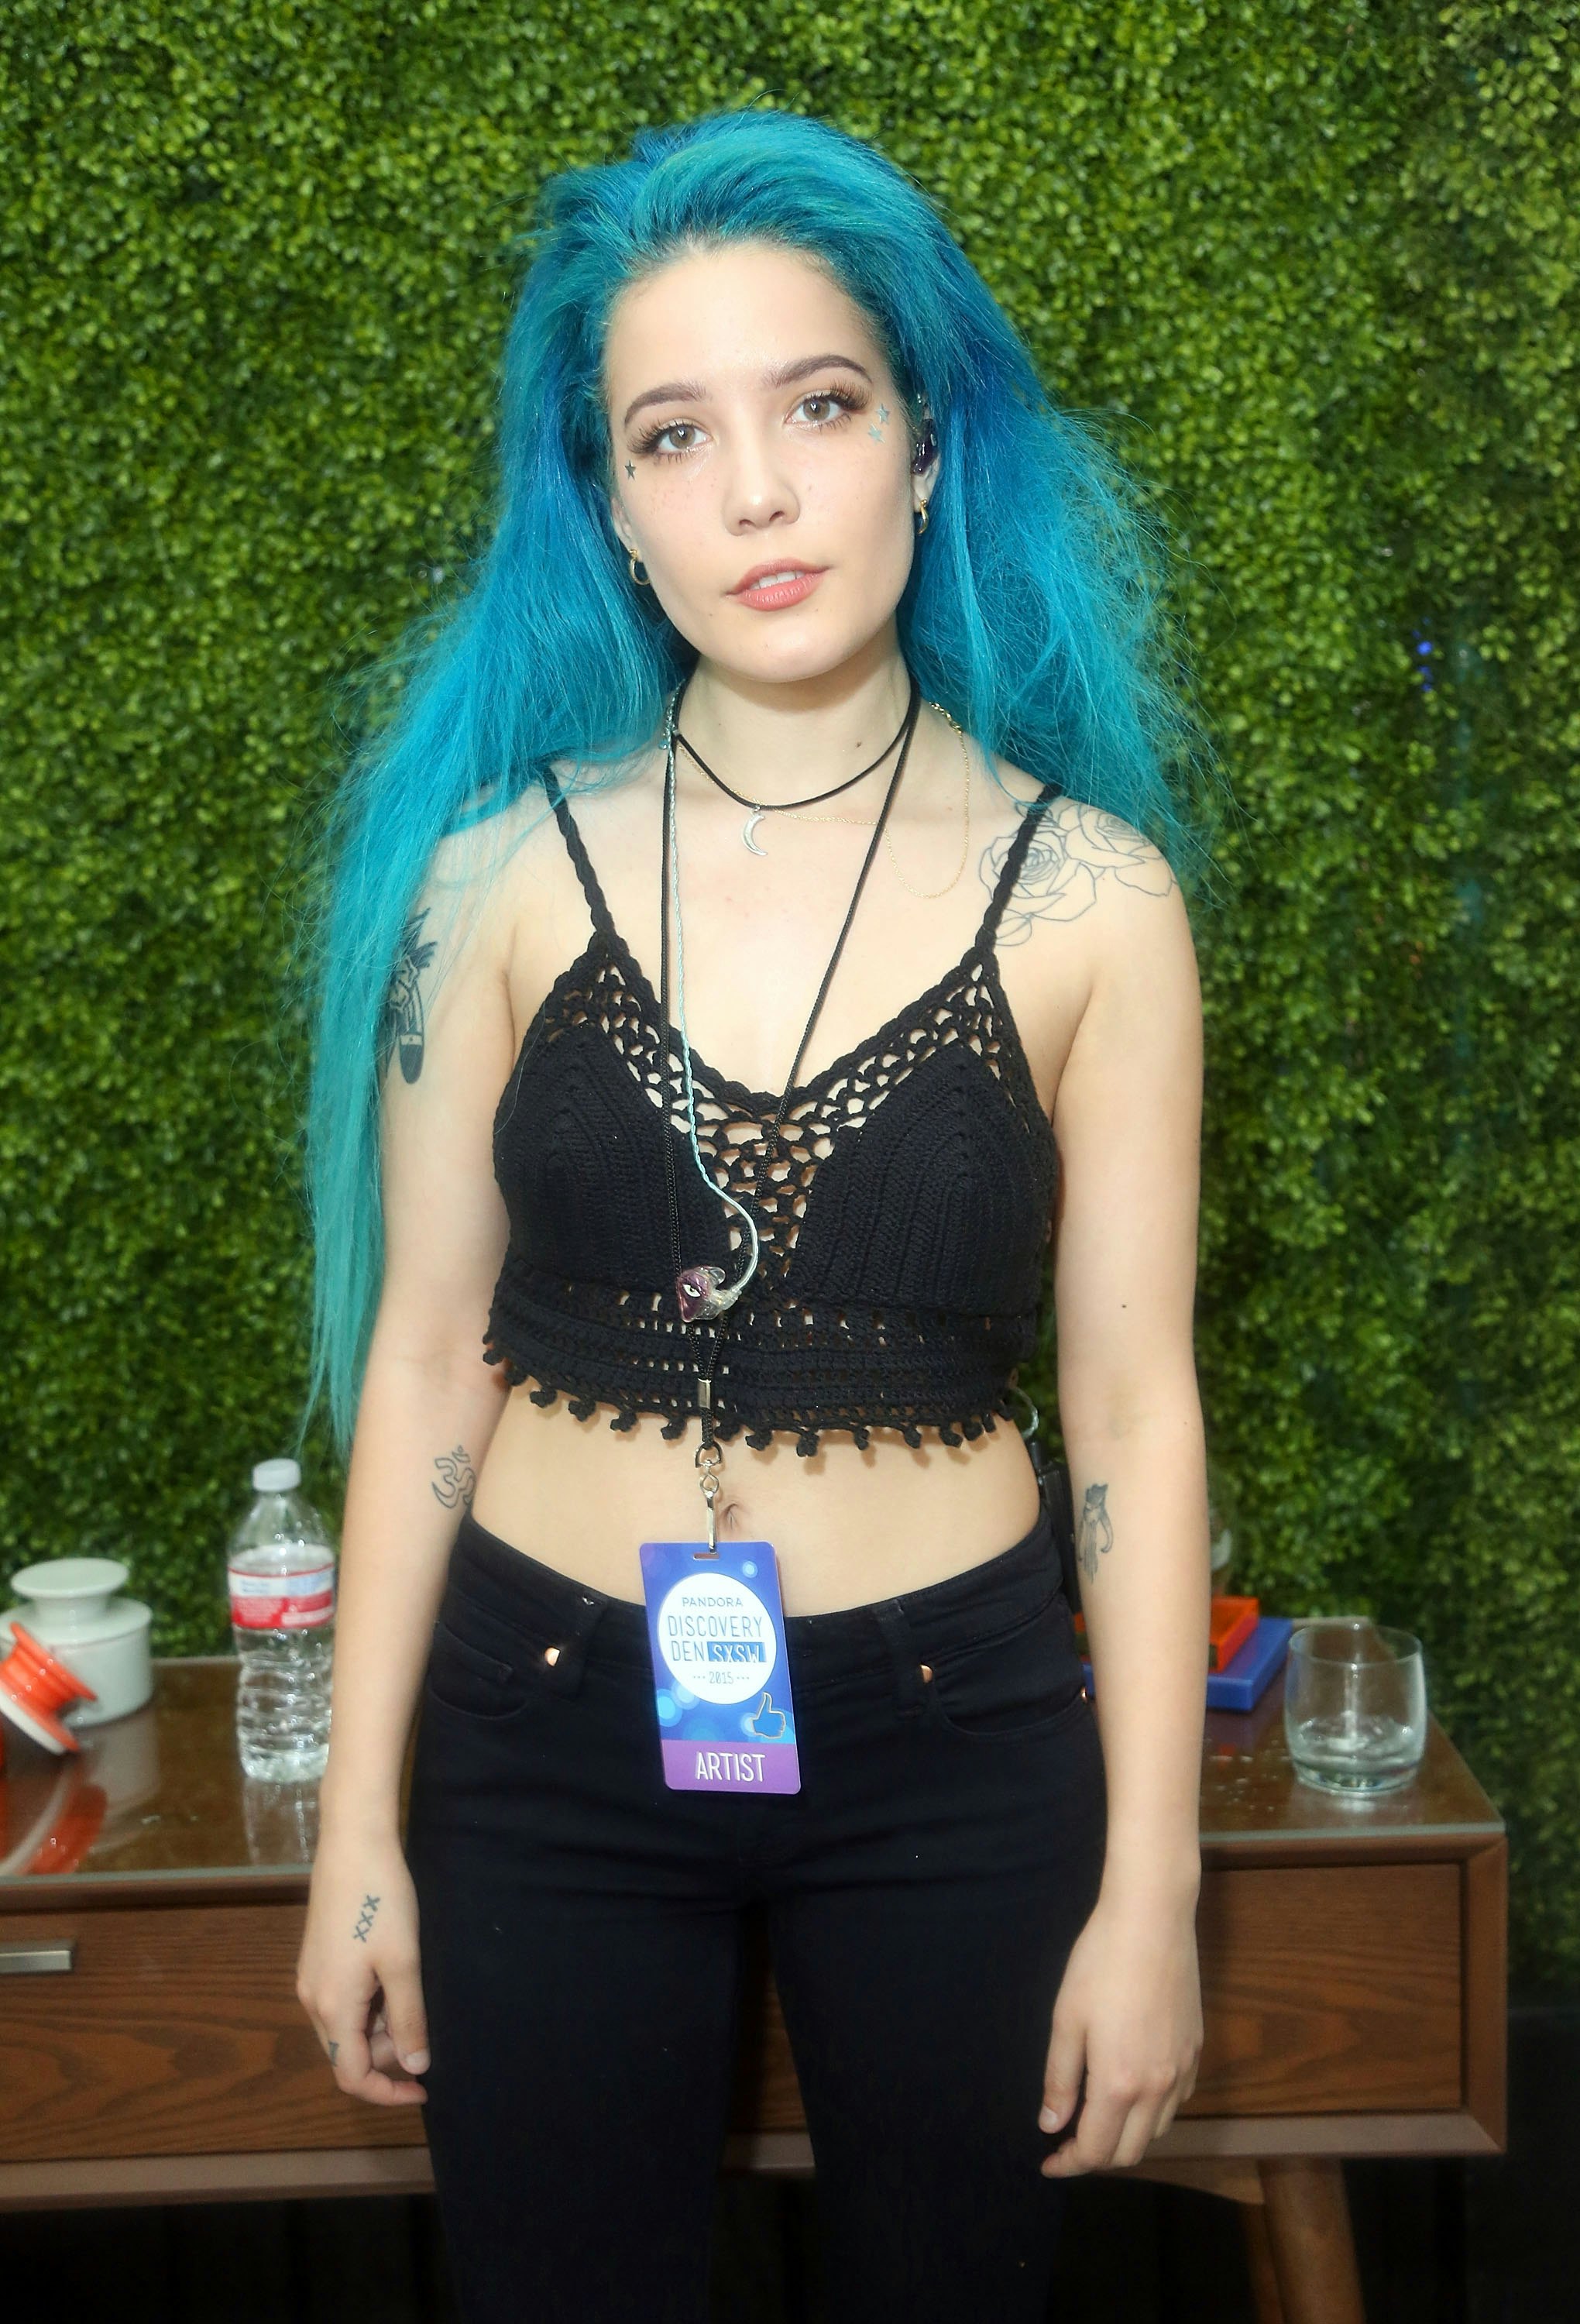 Halsey S Blue Hair Demonstrates Her Playful Side When It Comes To Style Photos